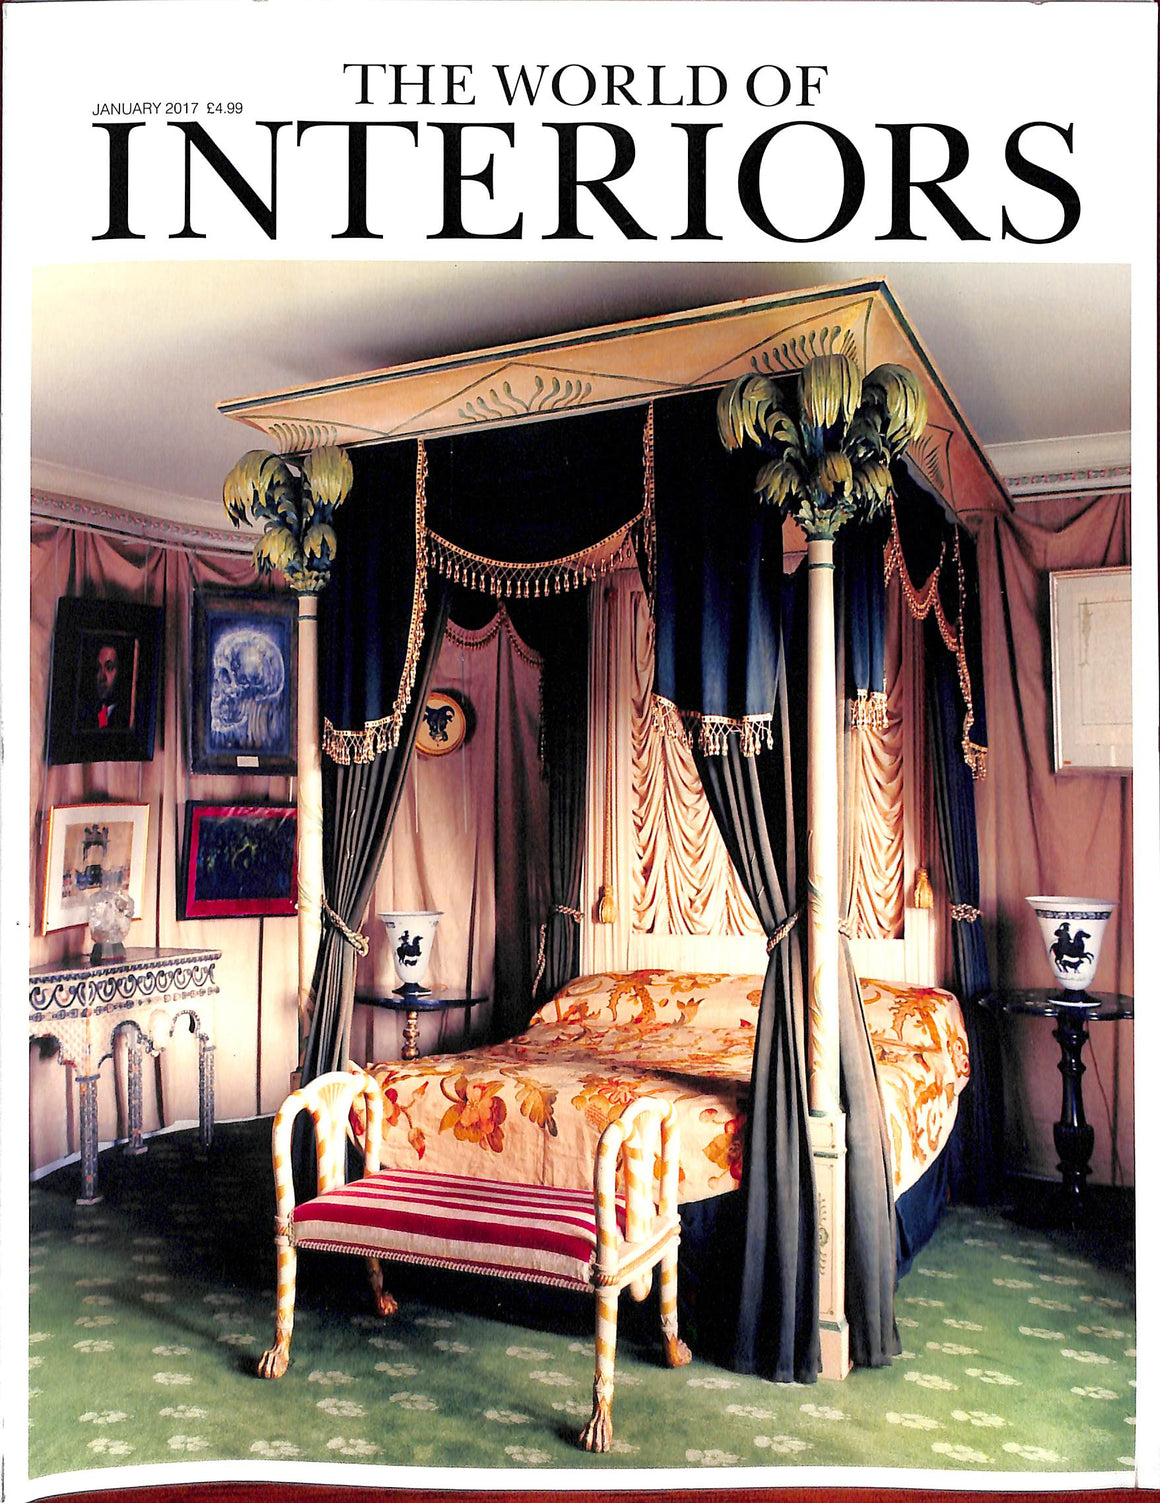 The World Of Interiors January 2017 (SOLD)